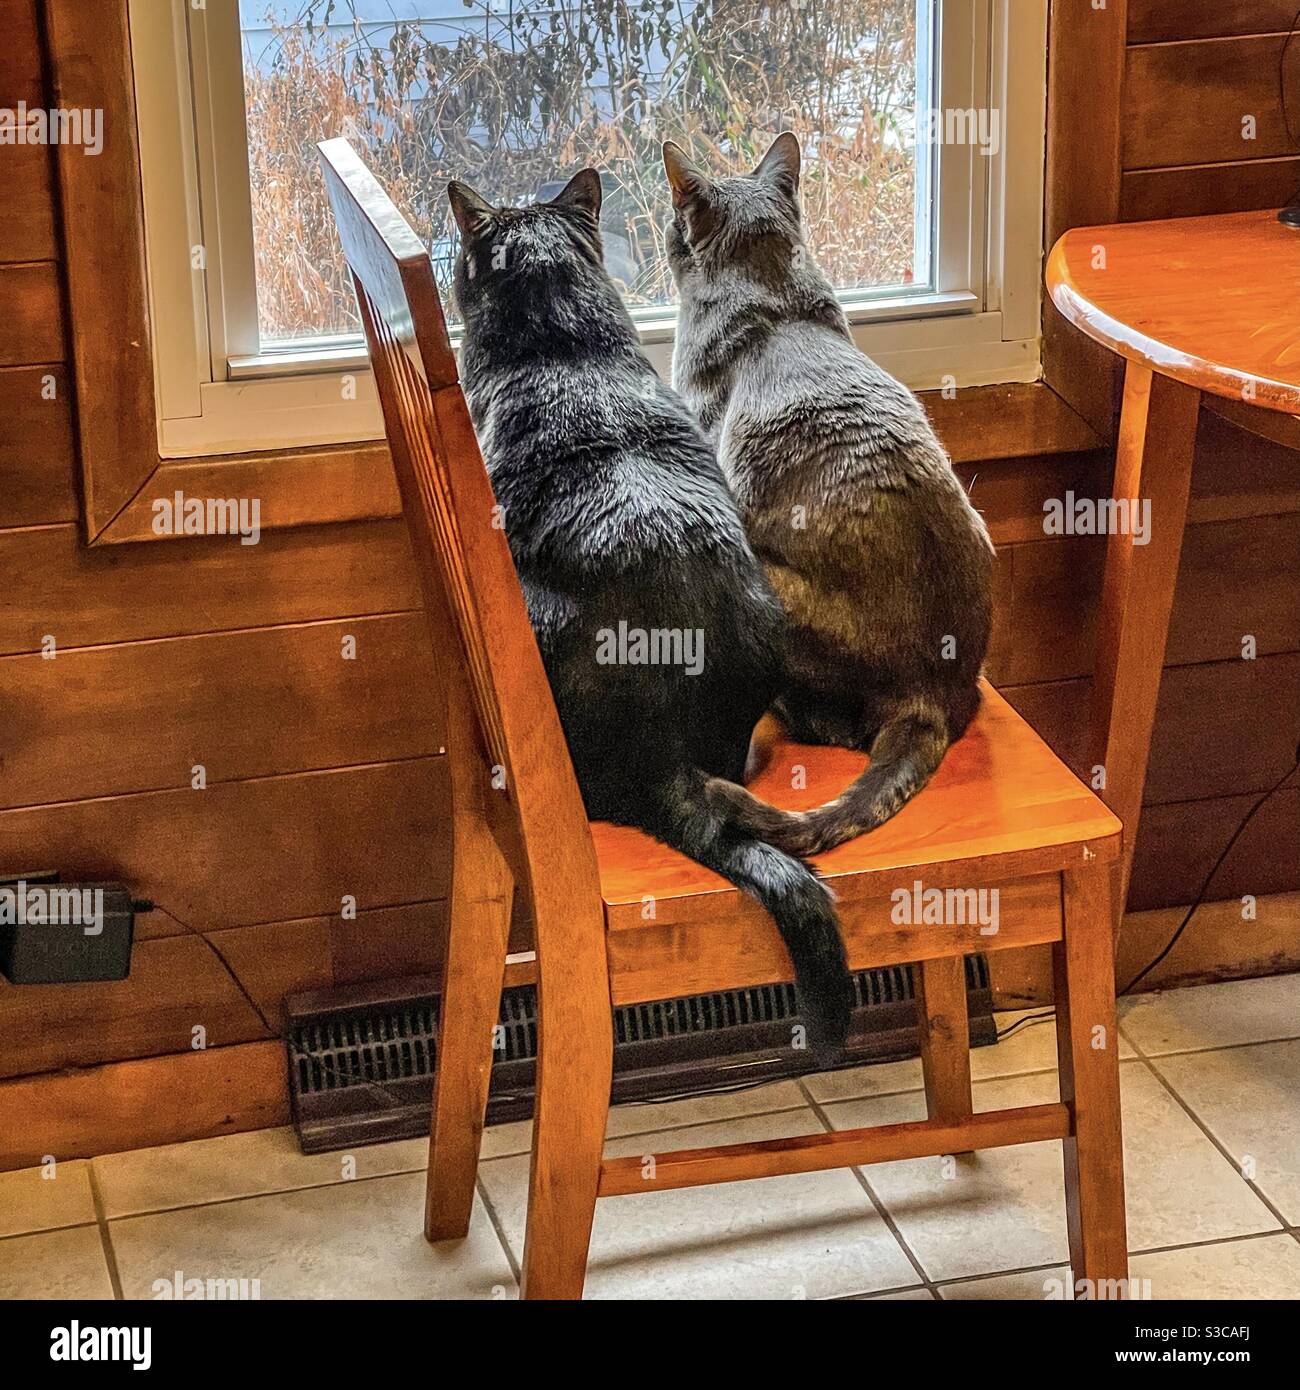 Buddies. Dark gray and light gray tabby cats looking out window. Stock Photo